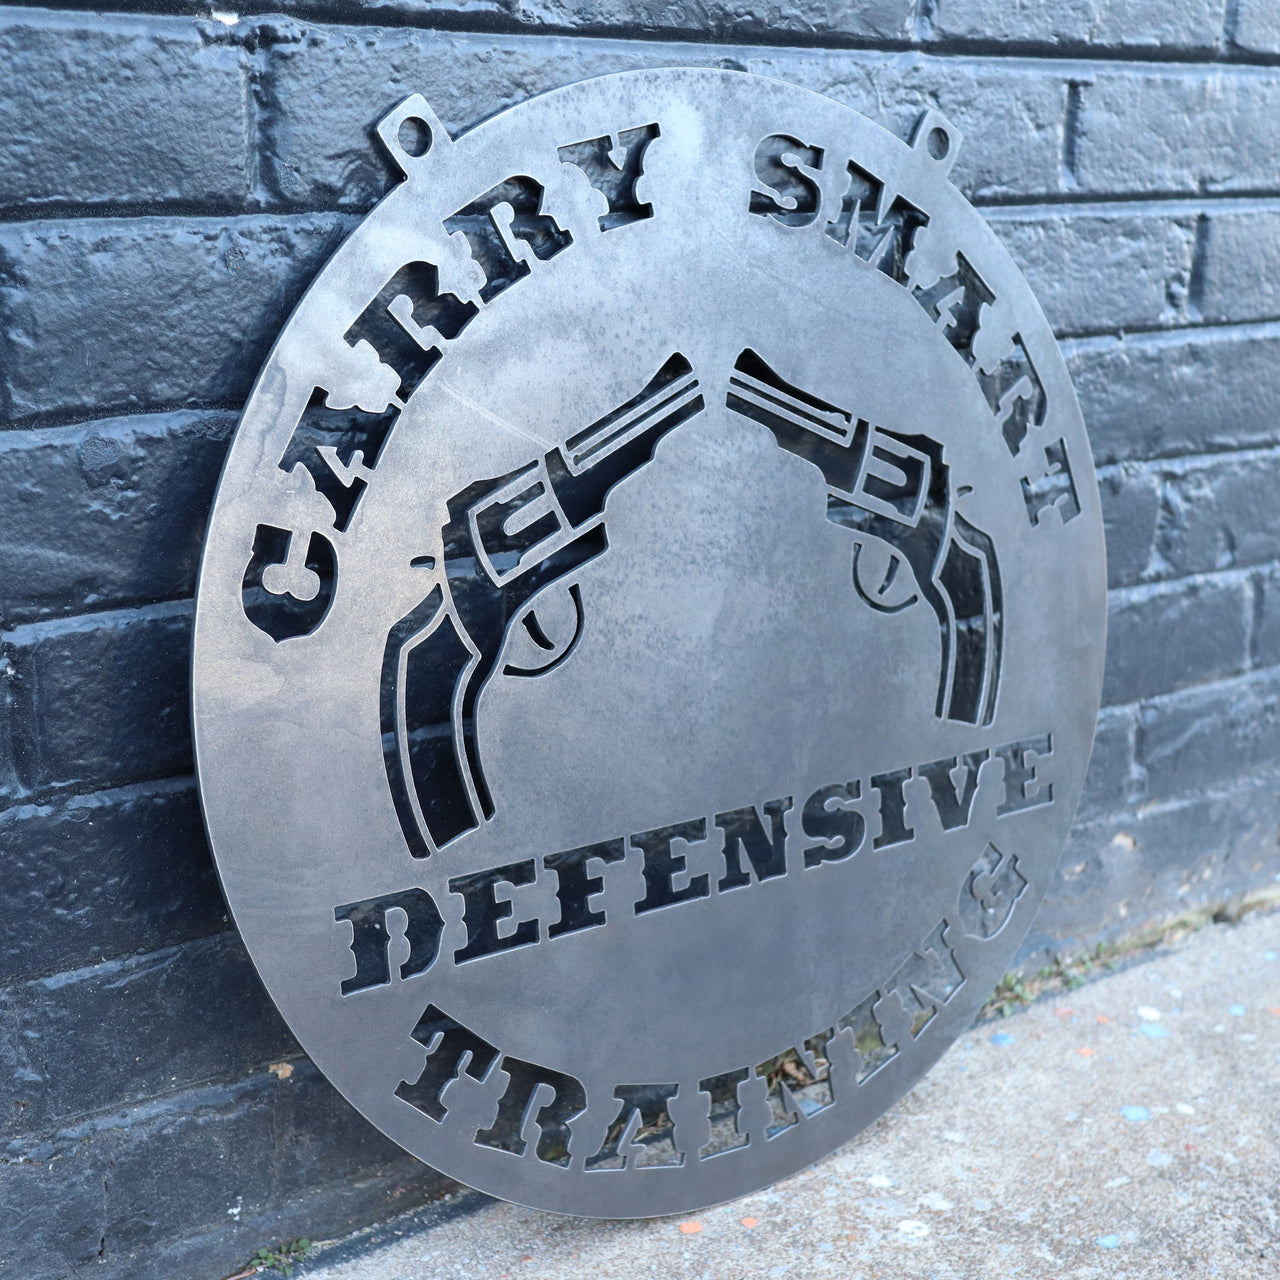 Personalized Hanging Metal Gun Sign - Pistol, Rifle, Firearms Defensive Safety Training - Father's Day 2021